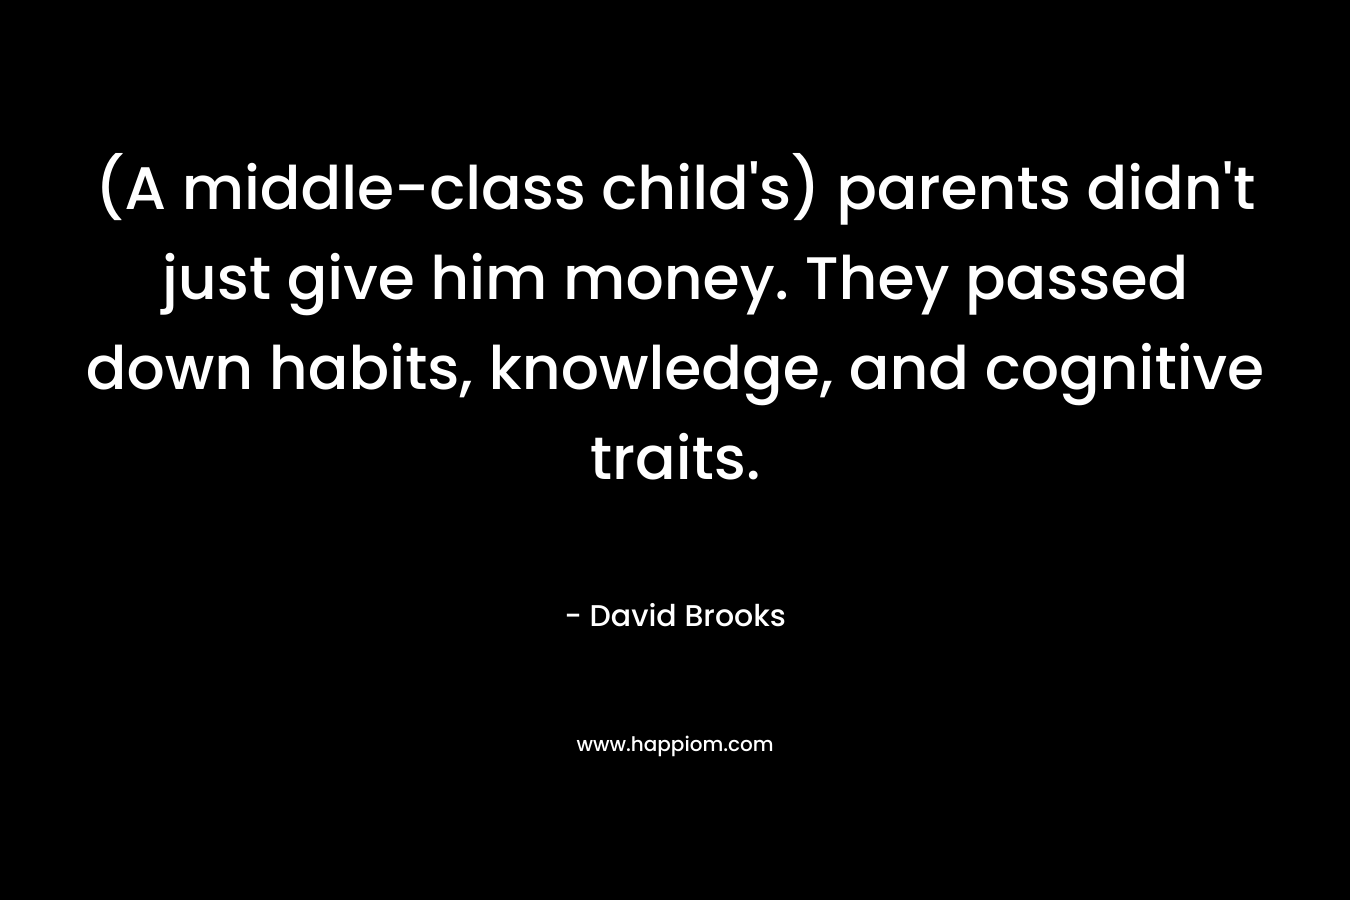 (A middle-class child's) parents didn't just give him money. They passed down habits, knowledge, and cognitive traits.